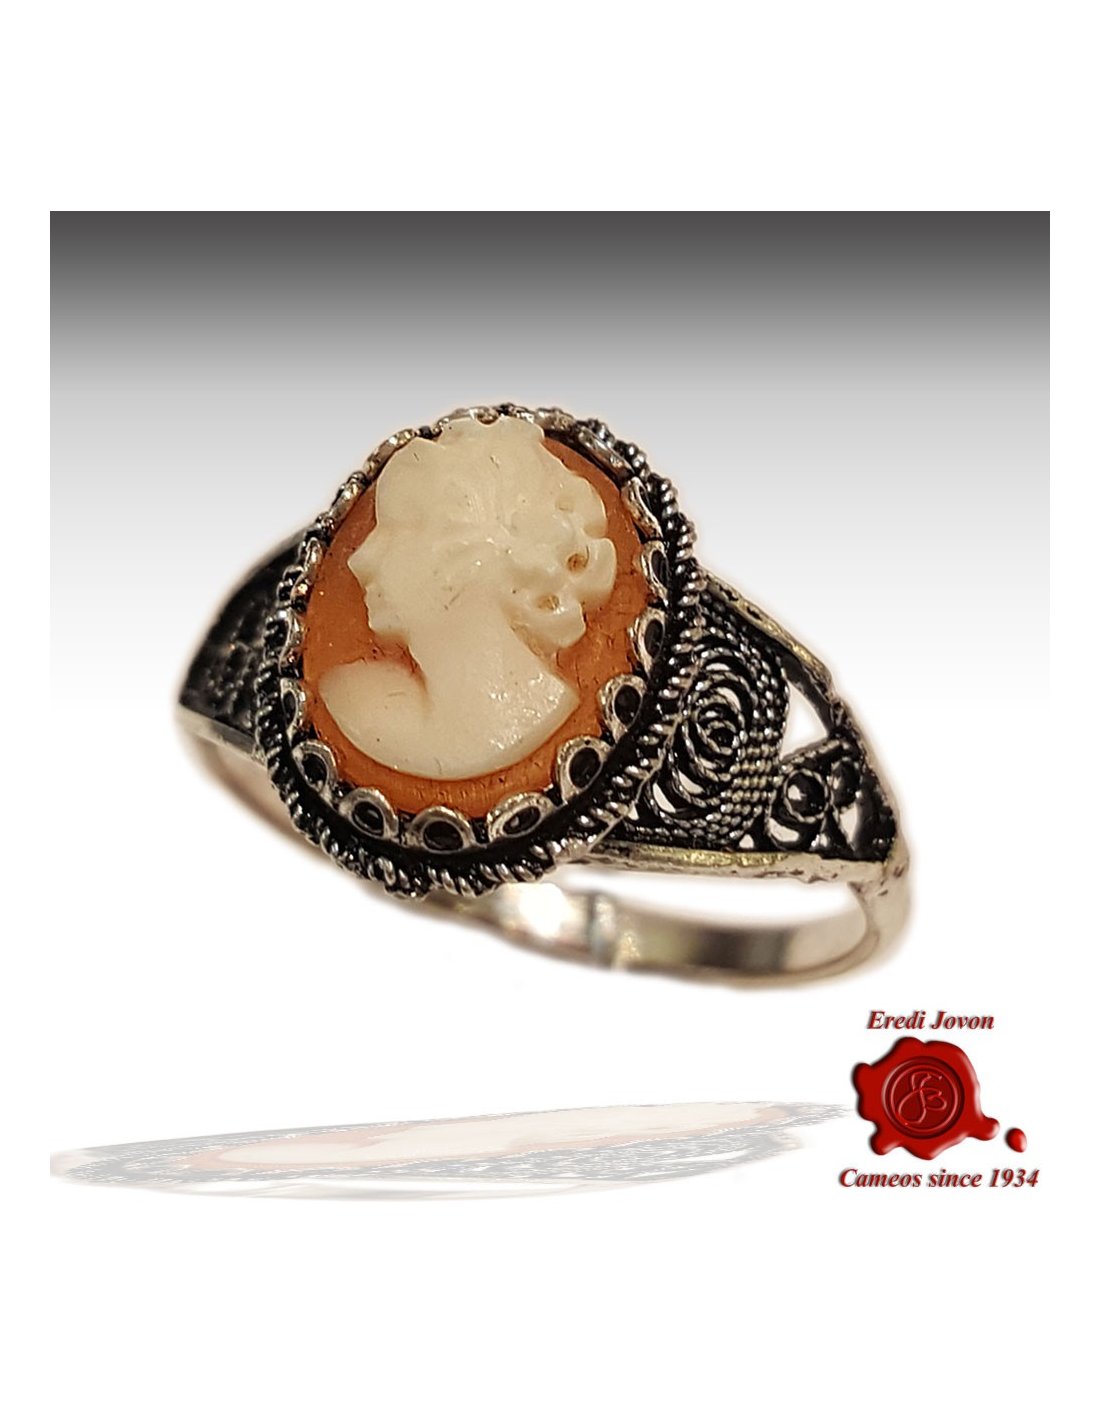 Details about   Hand Carved Italian Cameo Filigree Ring Sterling Silver 